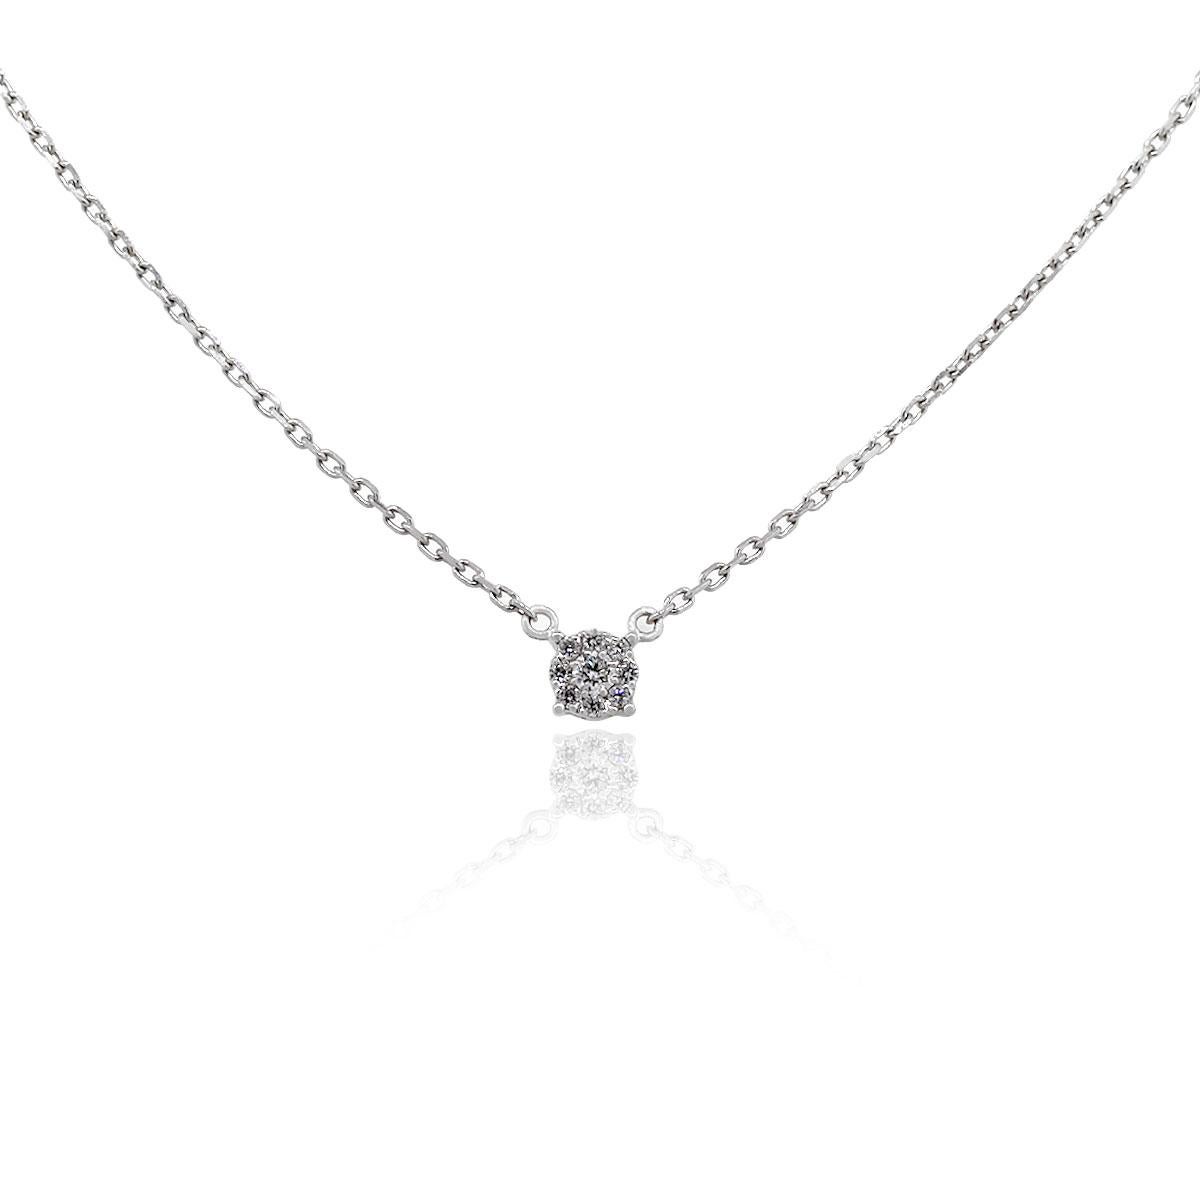 Material: 18k White Gold
Diamond Details: Approx. 0.13ctw of round cut diamonds. Diamonds are G/H in color and SI in clarity.
Measurements: Necklace measures 16″ in length.
Pendant Measurements: 0.19″ x 0.12″ x 0.19″
Fastening: Lobster Clasp
Item